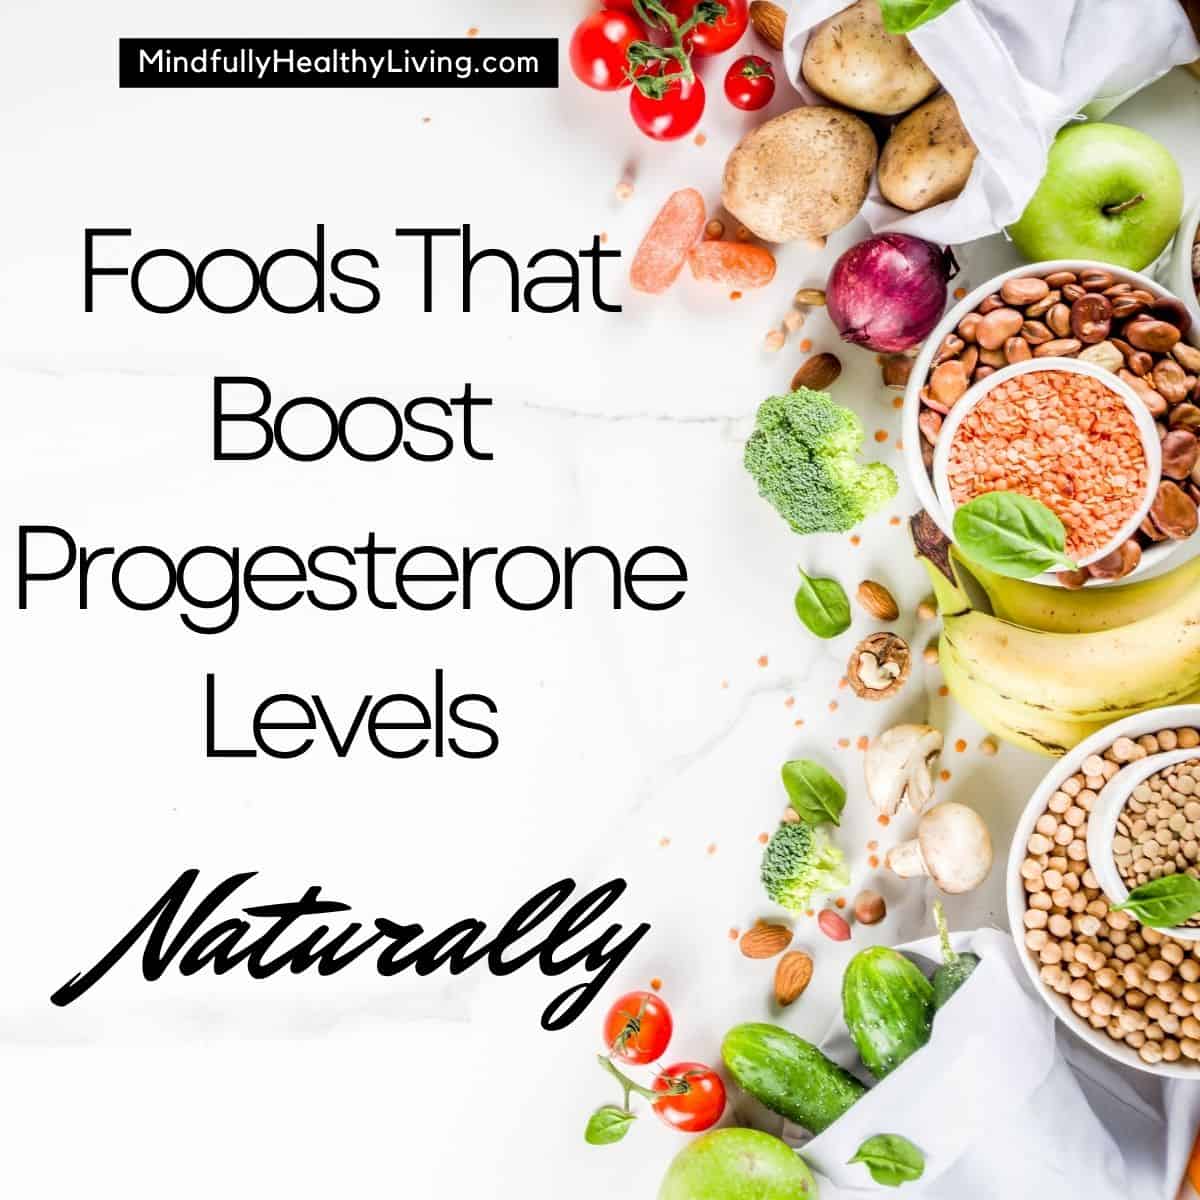 A photo with a white background and various whole foods on the right side of the shot decoratively positioned next to text that says, "Foods that boost progesterone levels naturally." At the top in a black rectangle and white print says "mindfullyhealthyliving.com"